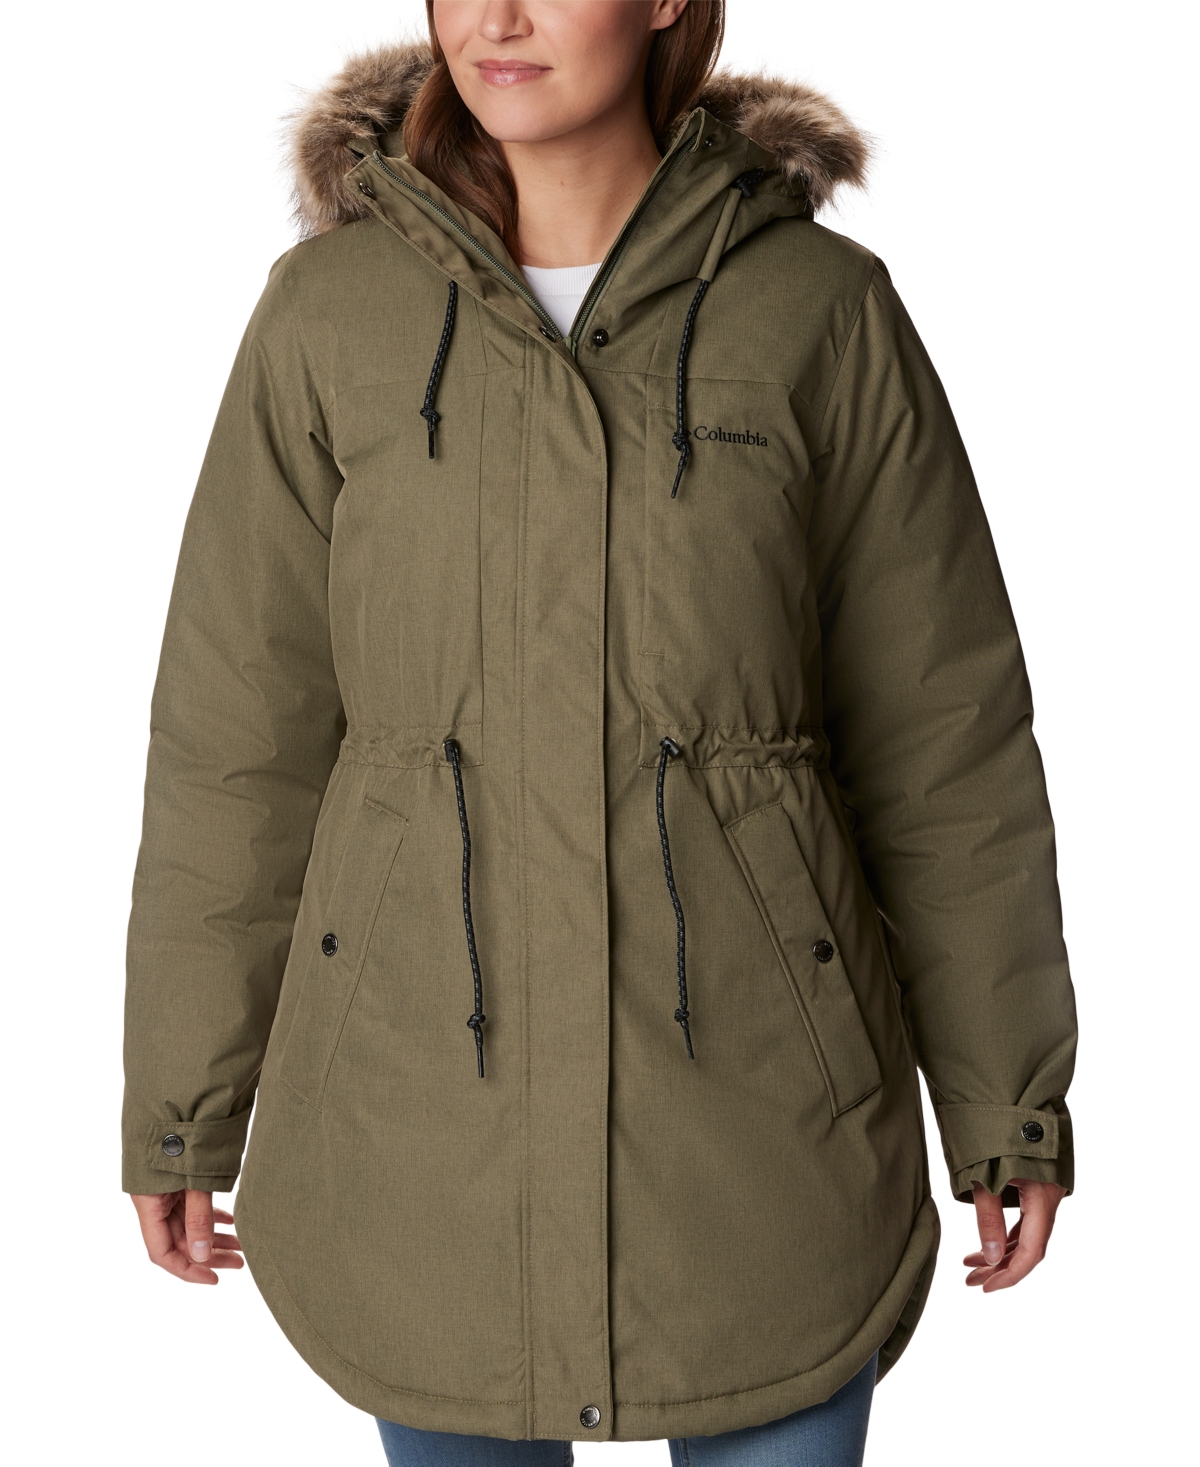 Columbia Women's Suttle Mountain Mid Jacket - Red Lily